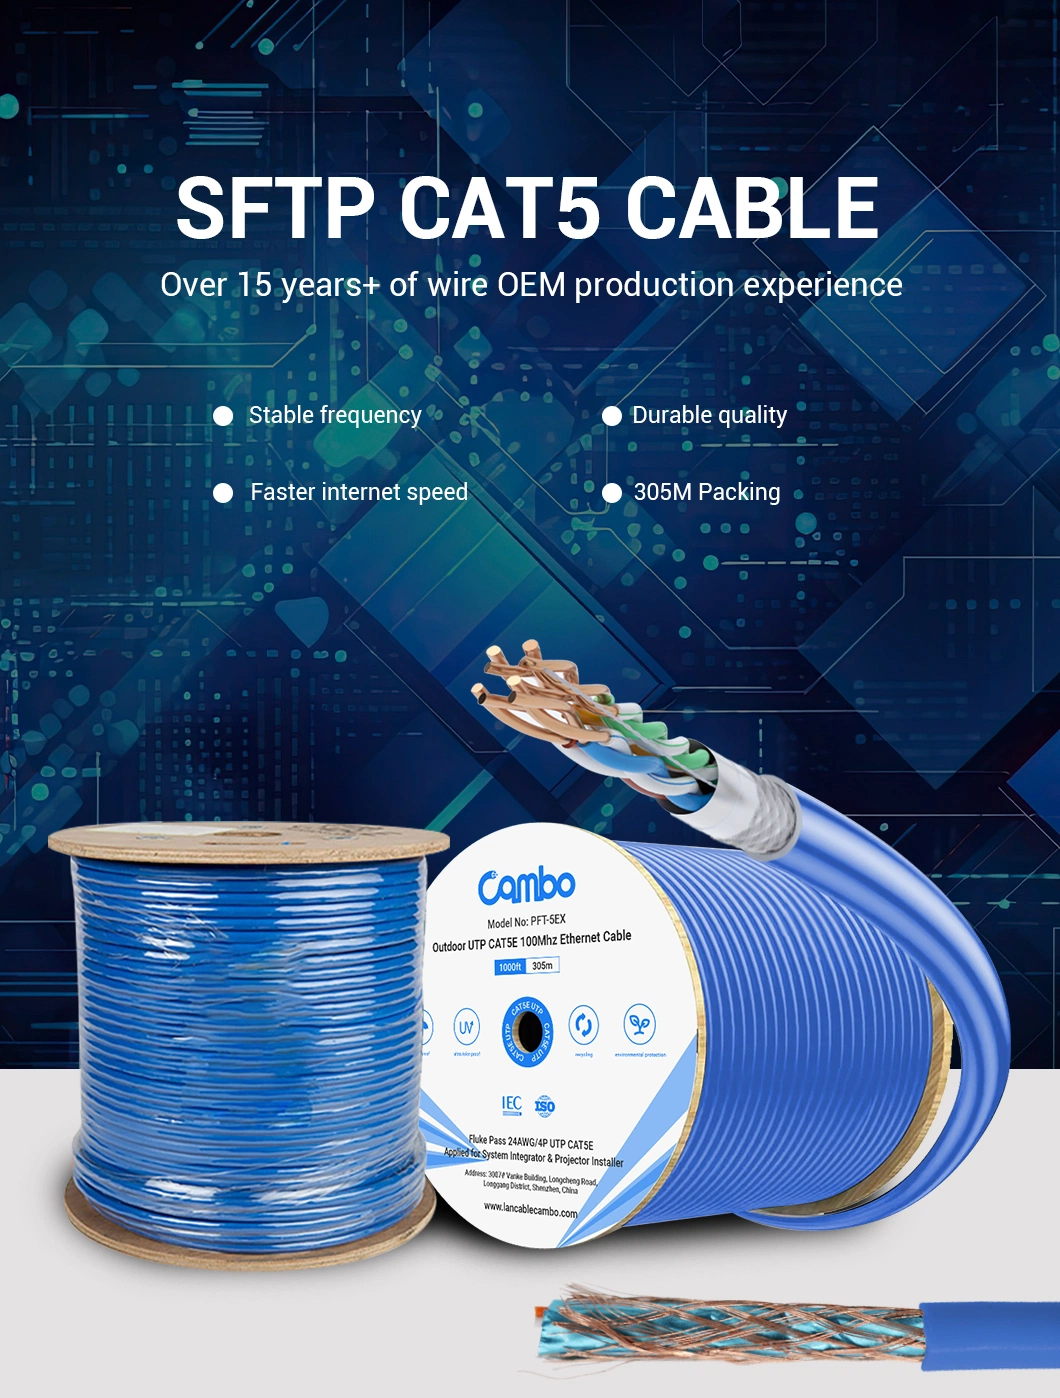 Reliable Quality SFTP Cable 0.50mm Interior Solid Copper 155mh Cat5 Cat5e Internet Cable